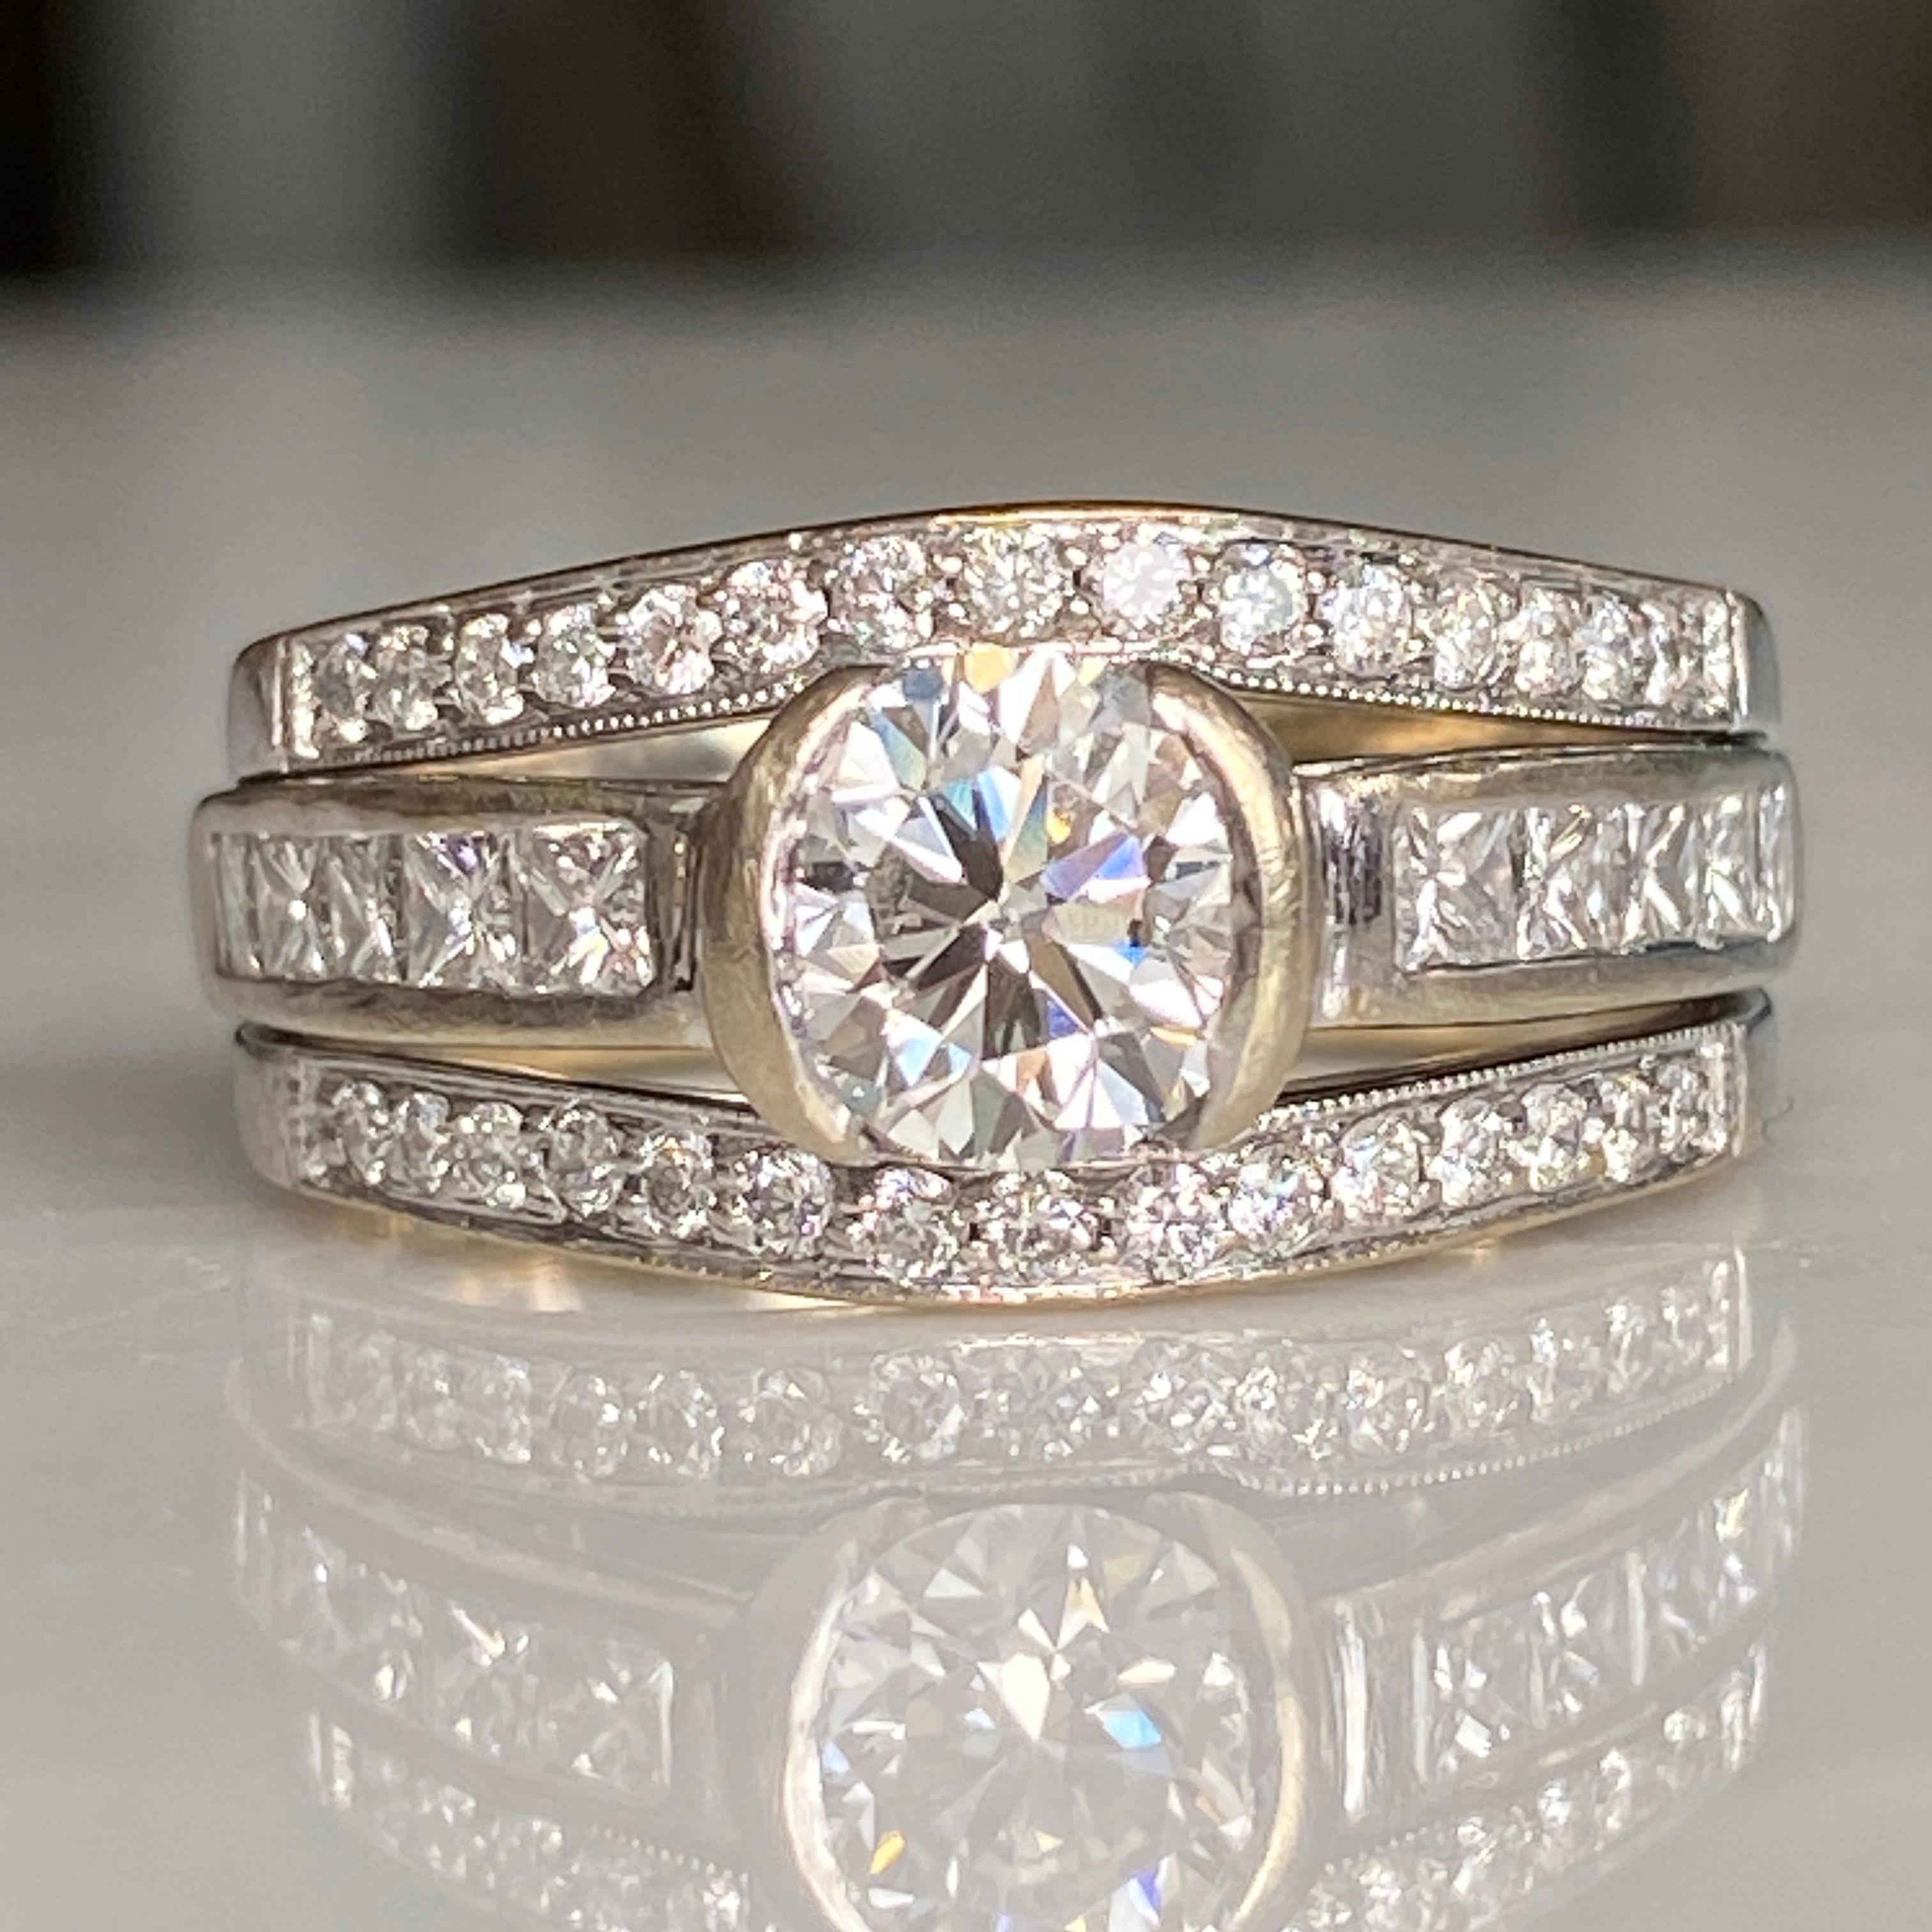 Details:
Fabulous Mid Century diamond engagement ring set with a combined total weight of 1.74 carat. This set is gorgeous, and has lots of bling! Would make a fantastic wedding set or even an upgrade for an anniversary! Lovely set, you will not be